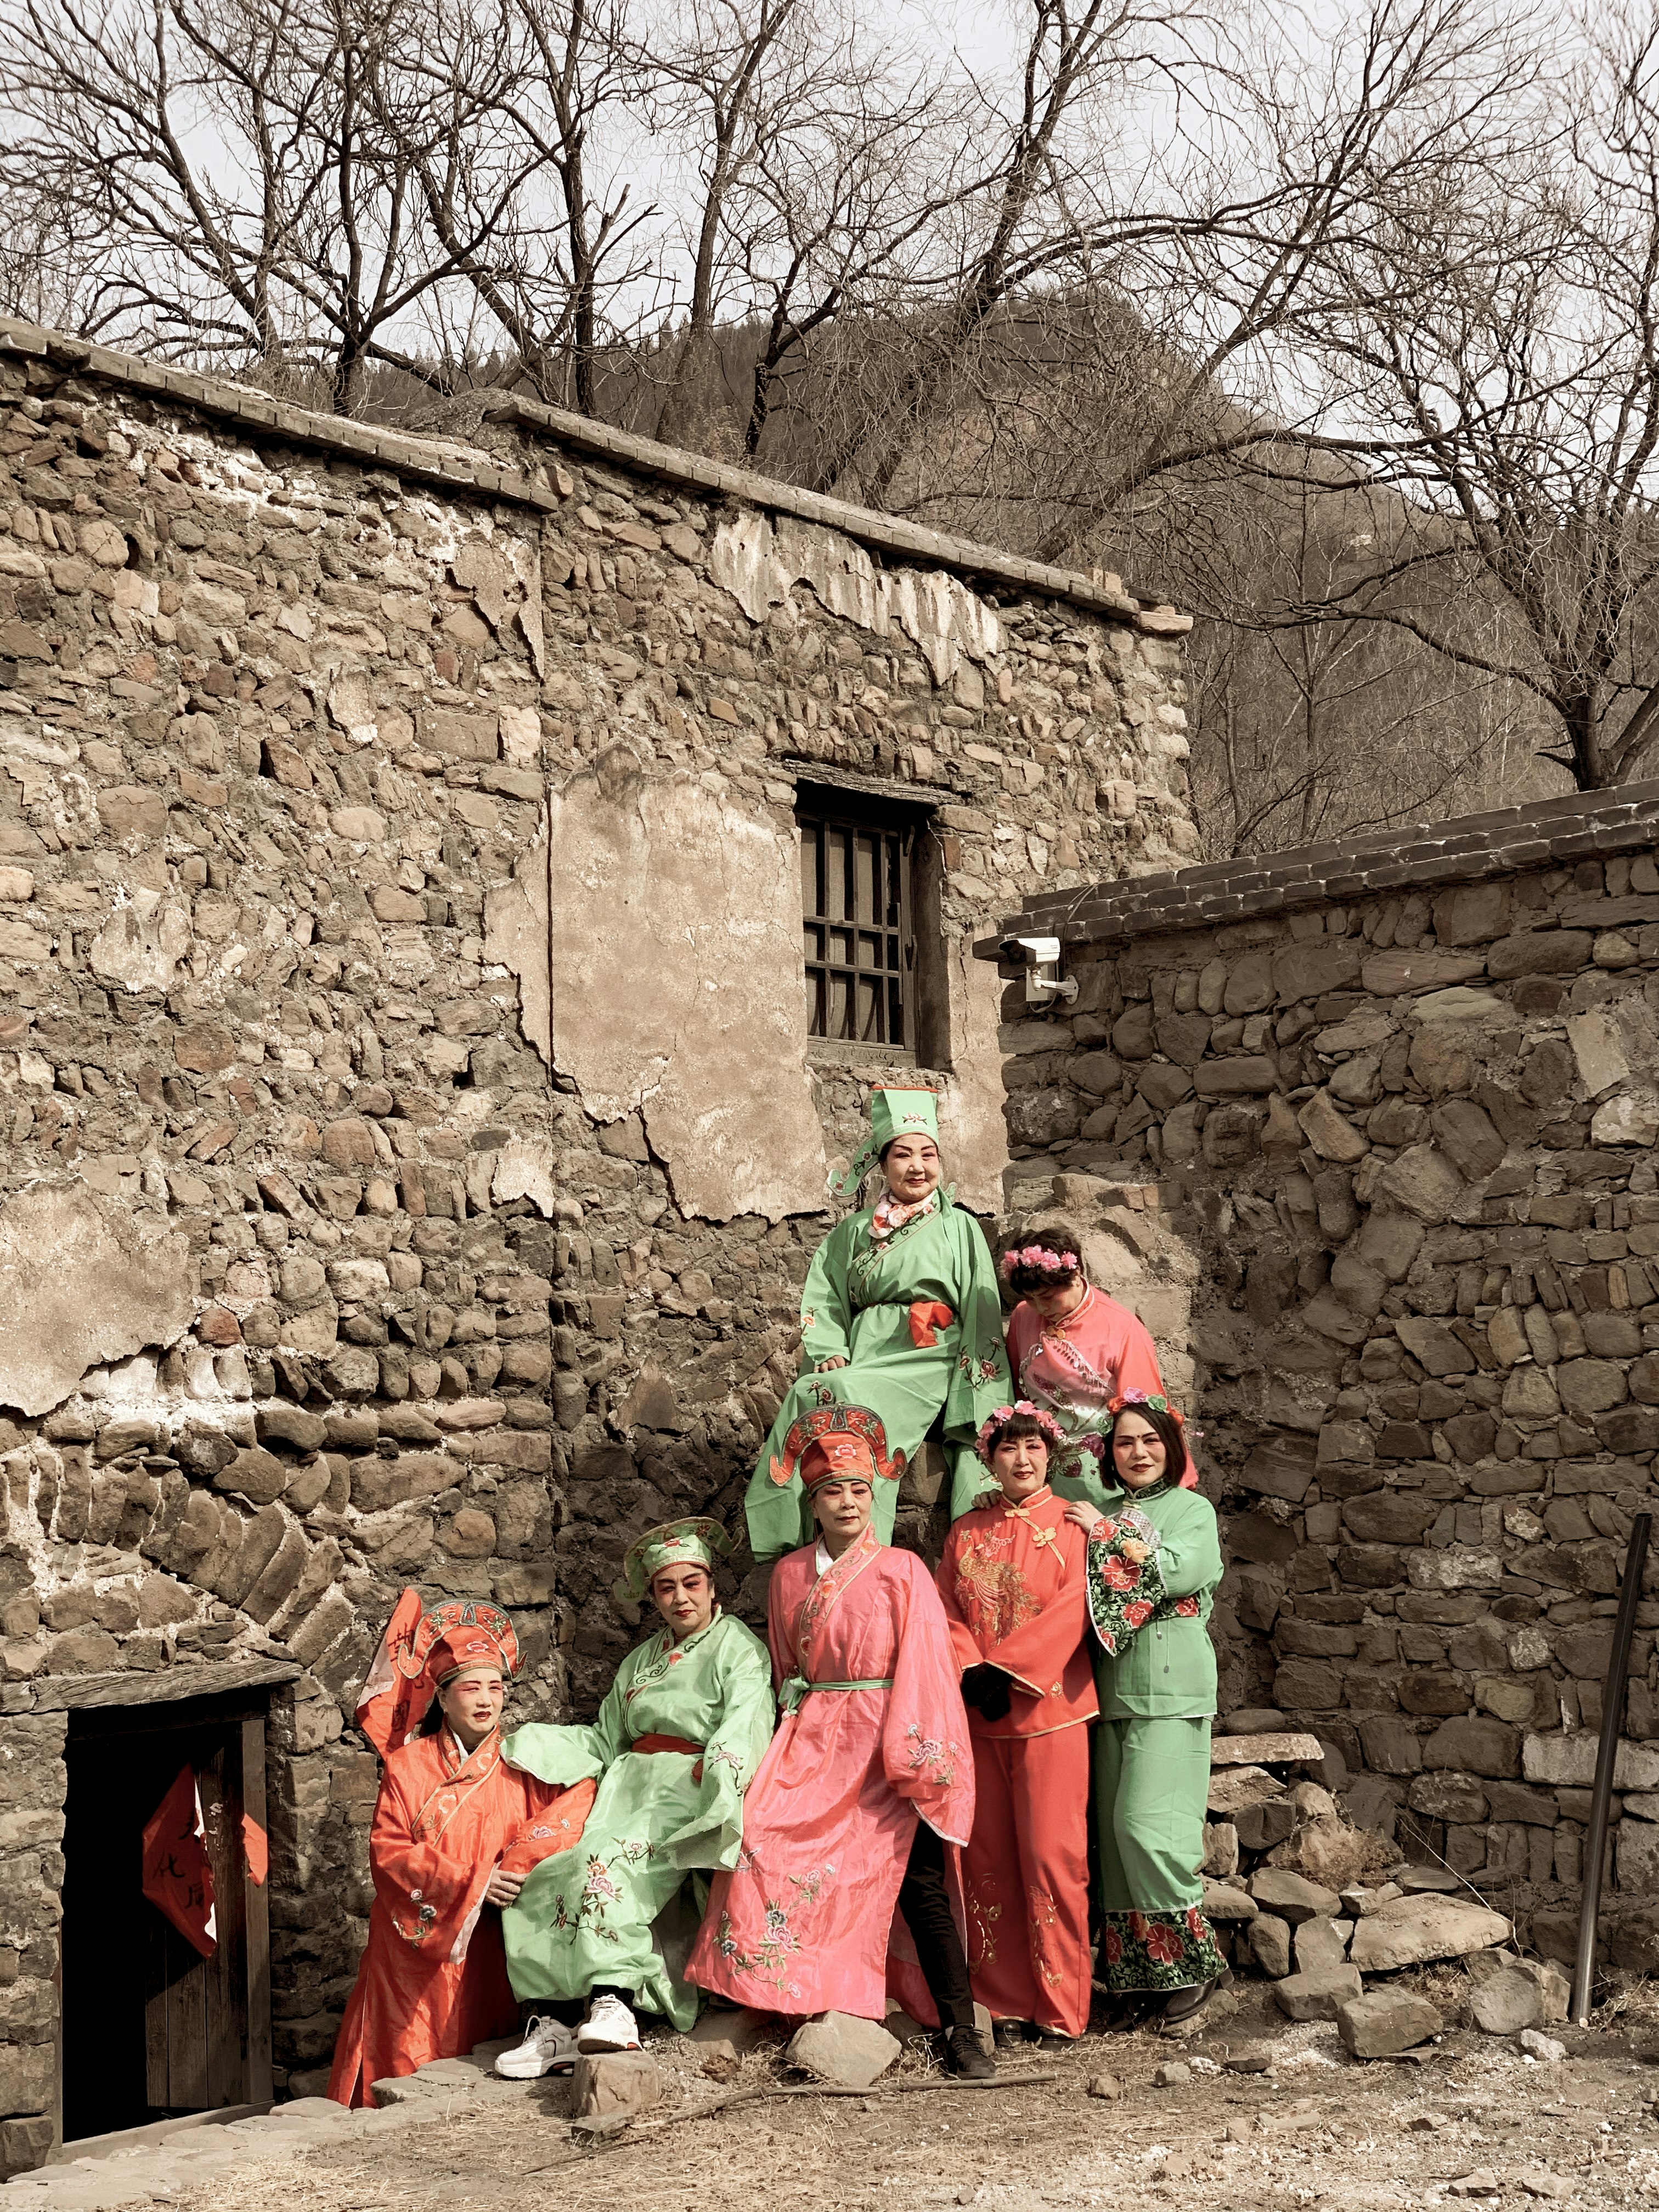 people in green and orange traditional dress standing near brown brick wall during daytime